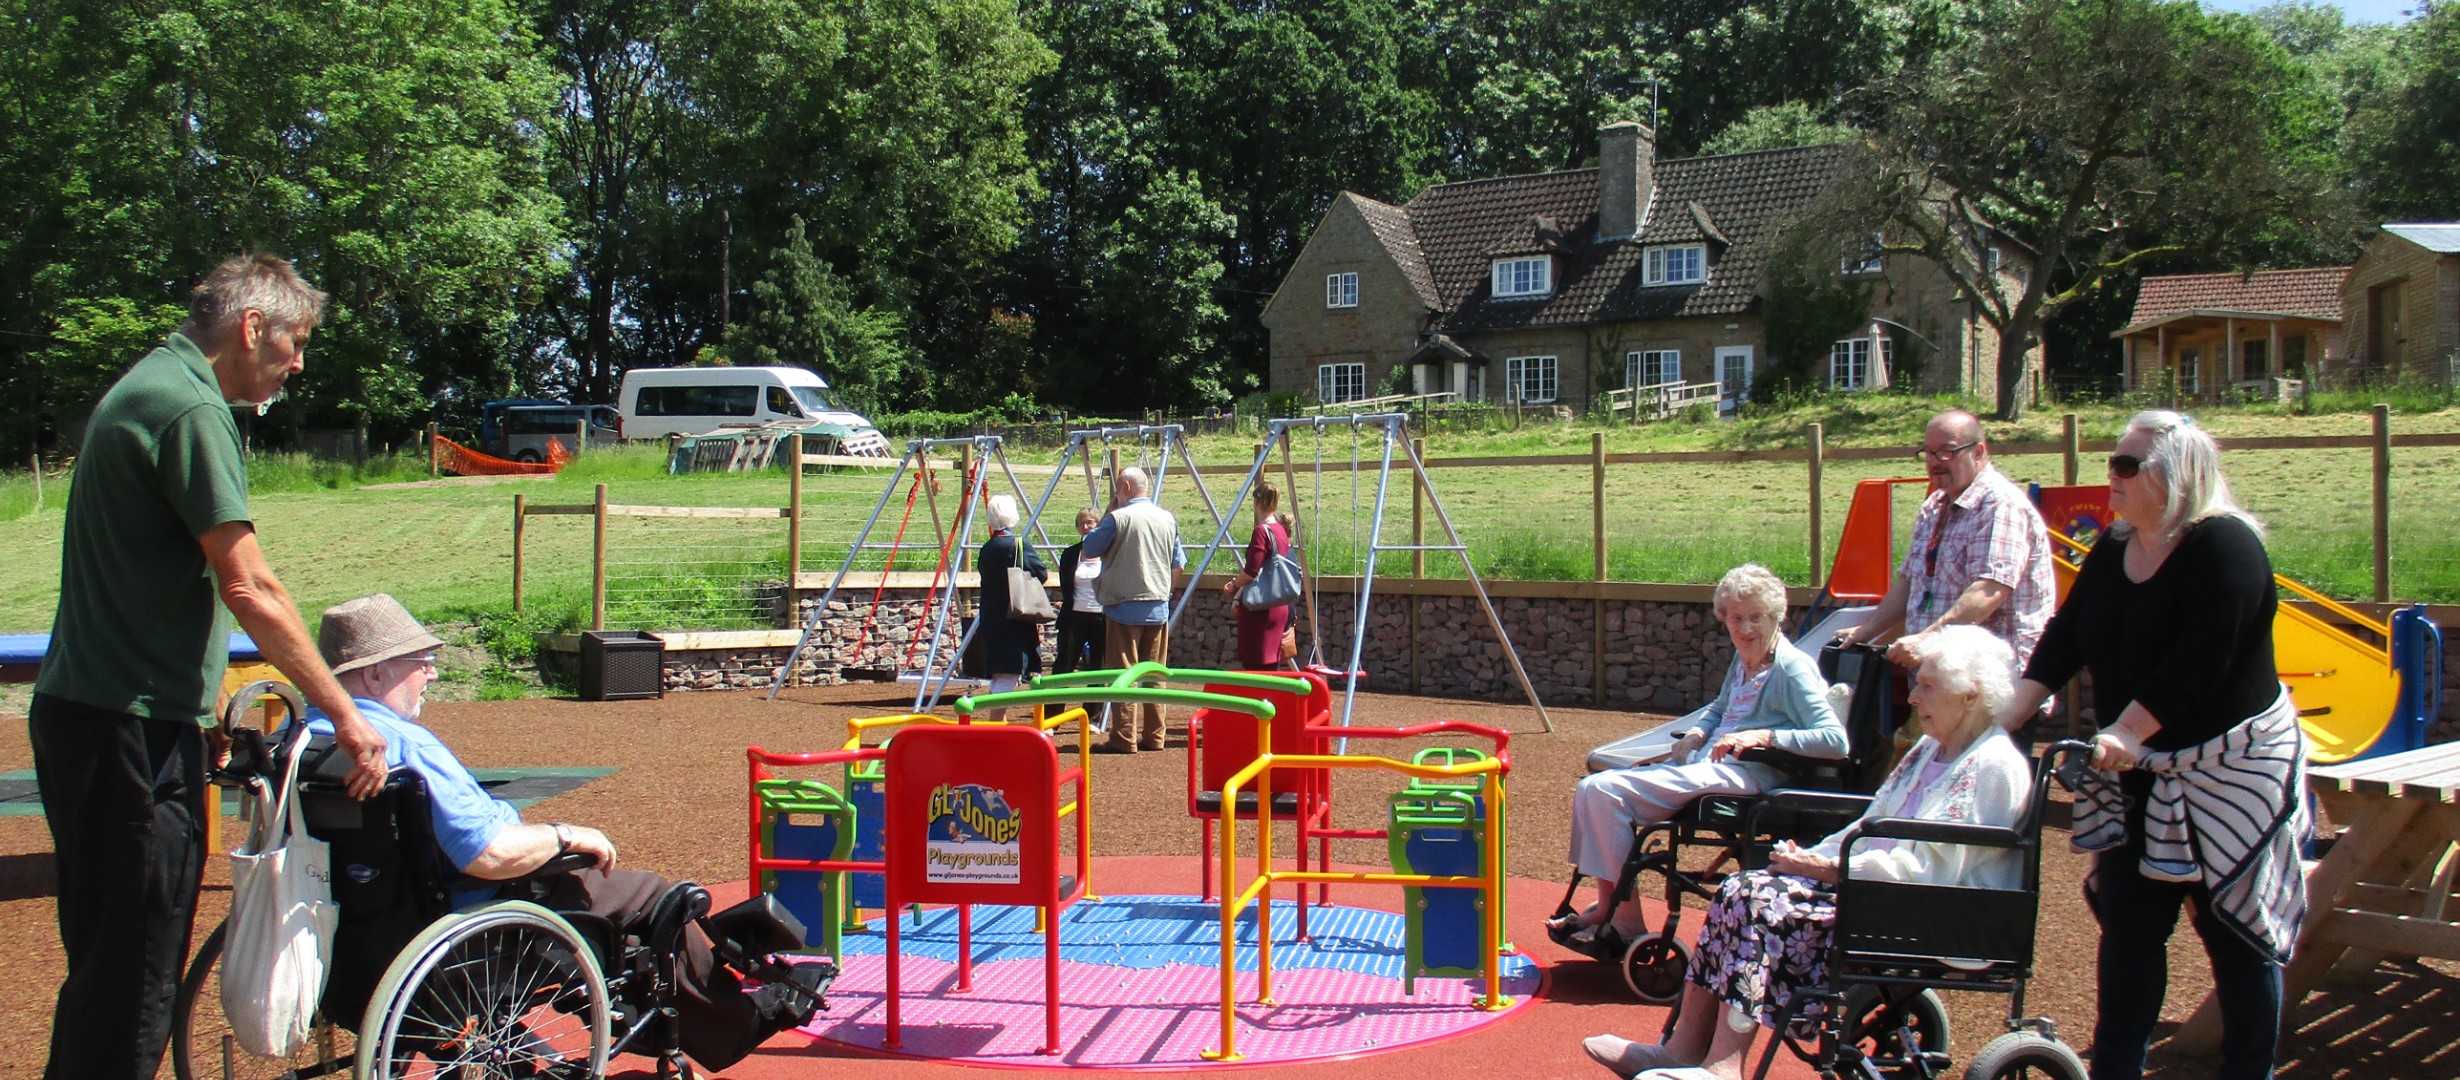 Image shows the Orchard Trust activity park with three people in wheelchairs and their carers about to use the roundabout. The orchard Trust orchards Care Home is in the background